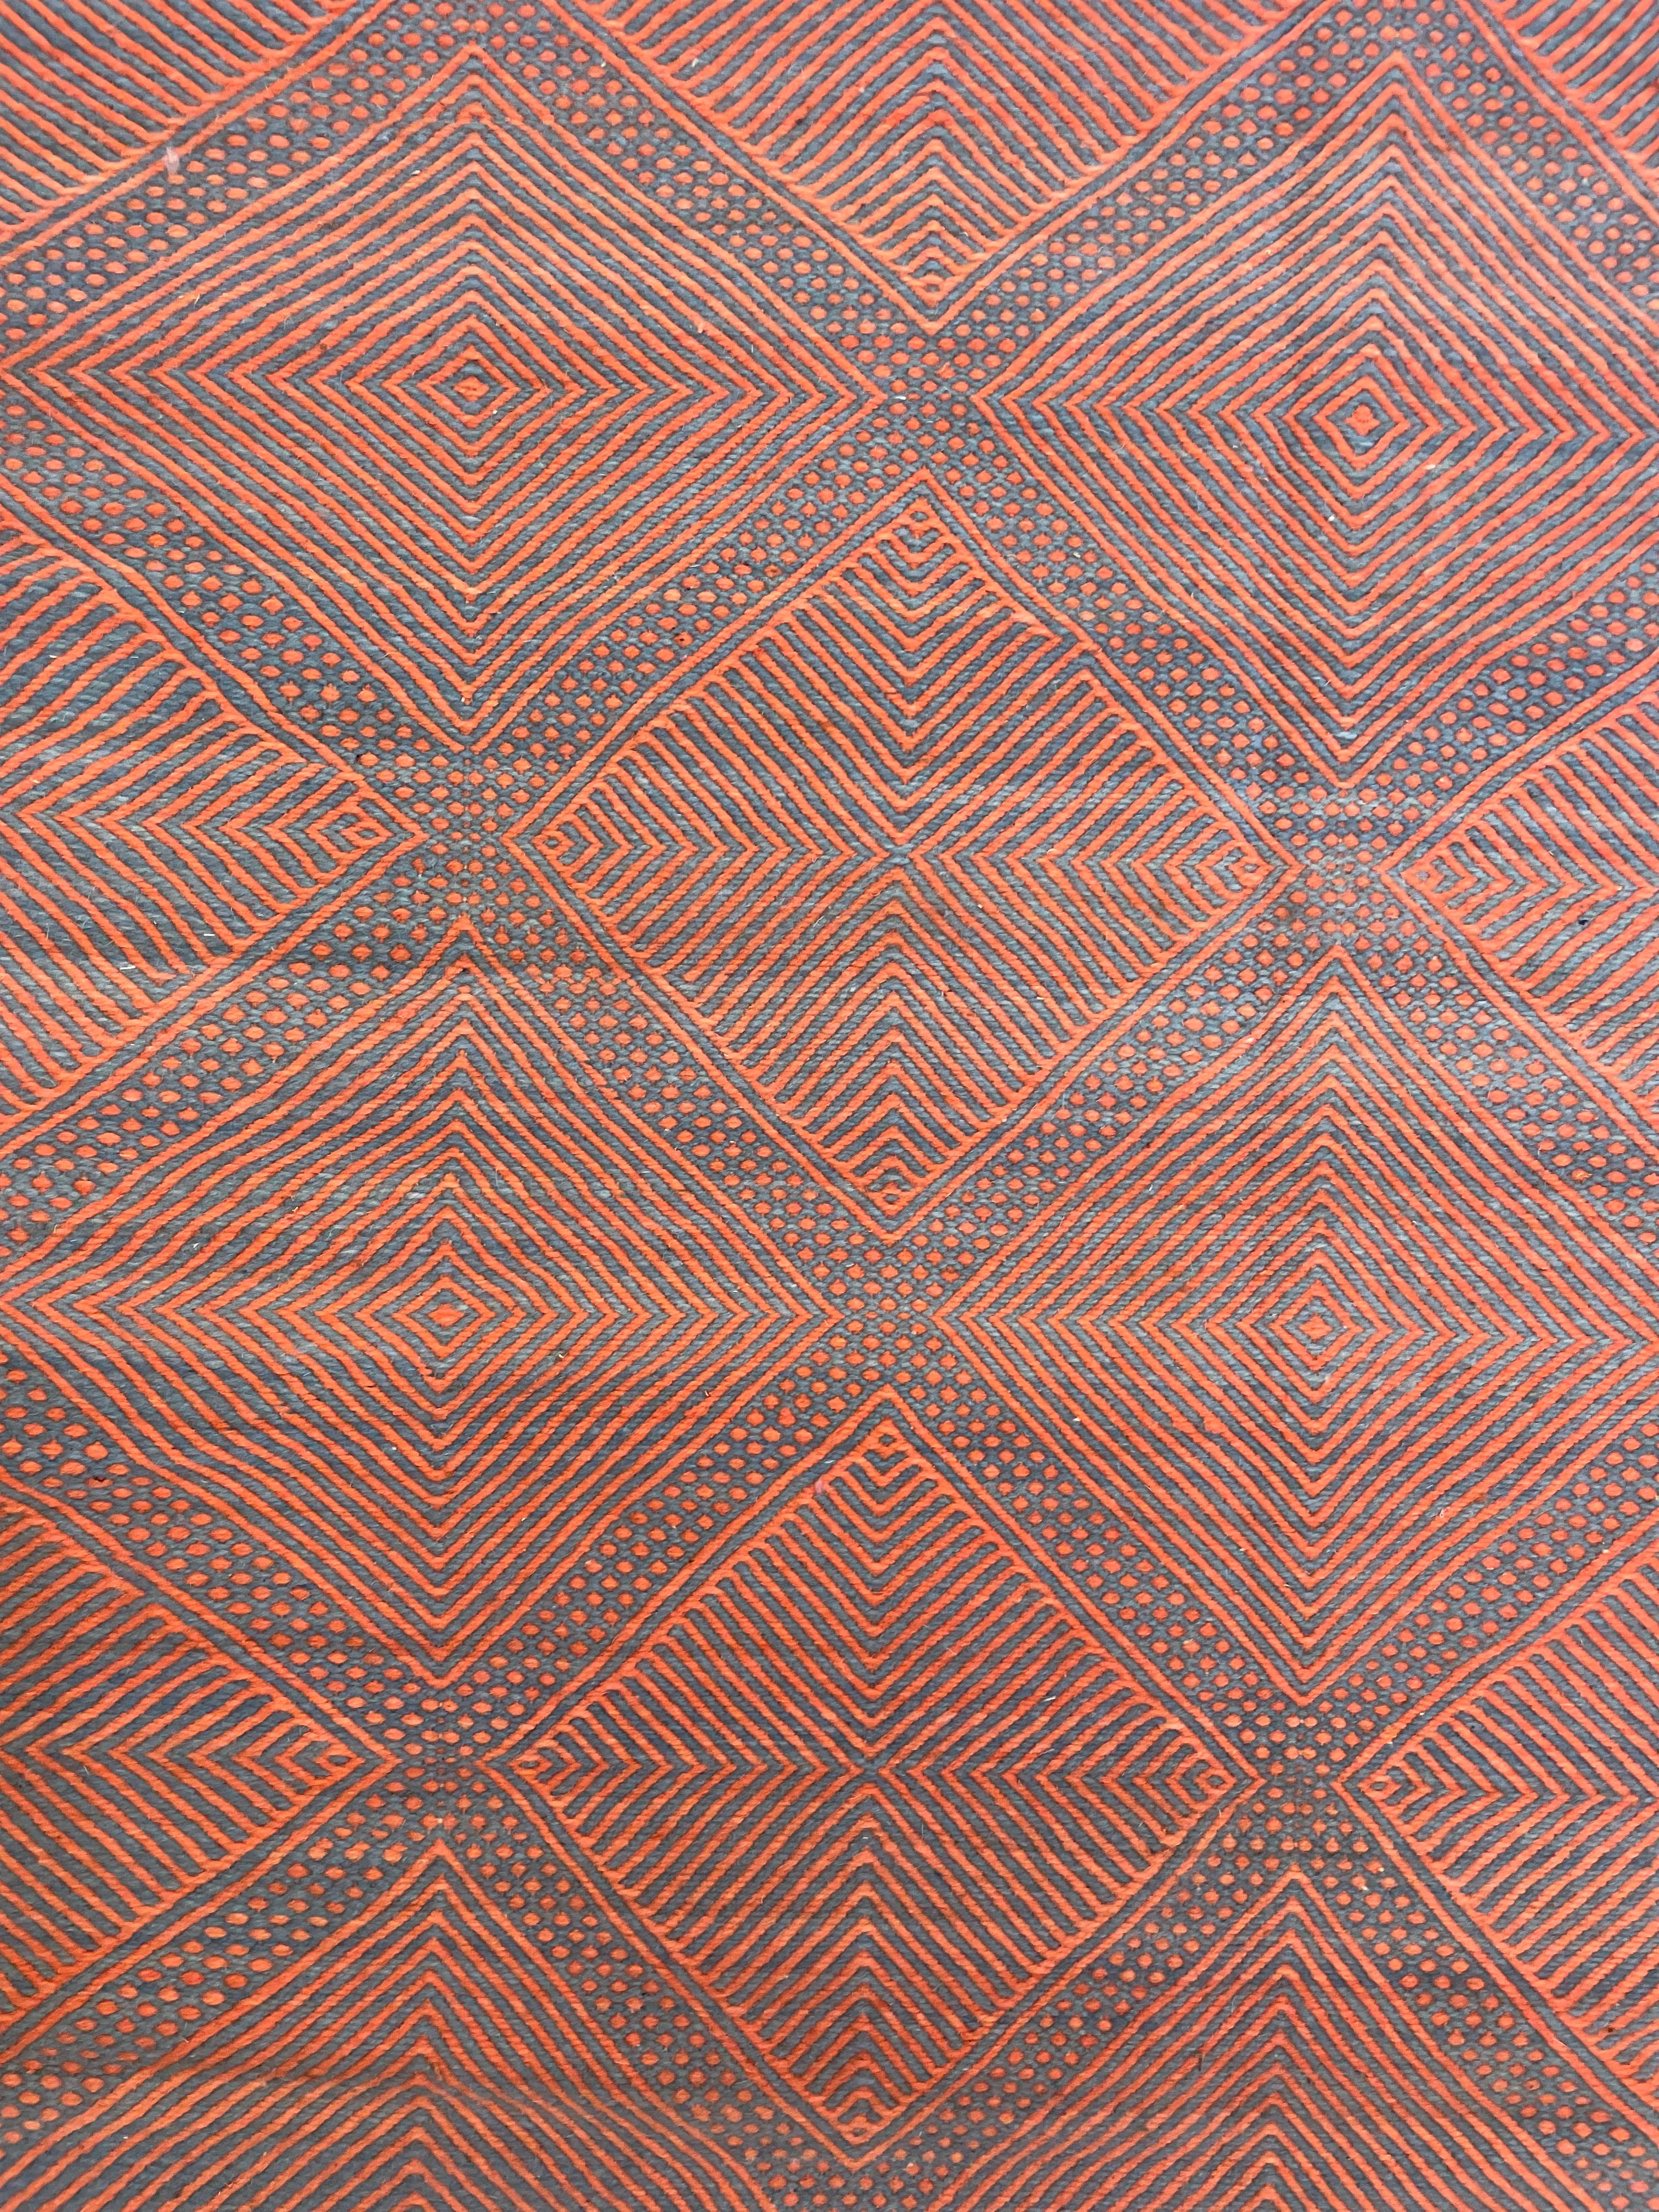 Detail of Zanafi weaving featuring repetitive geometric diamond shapes in pink and denim blue  | Kantara: Moroccan Rugs in Los Angeles